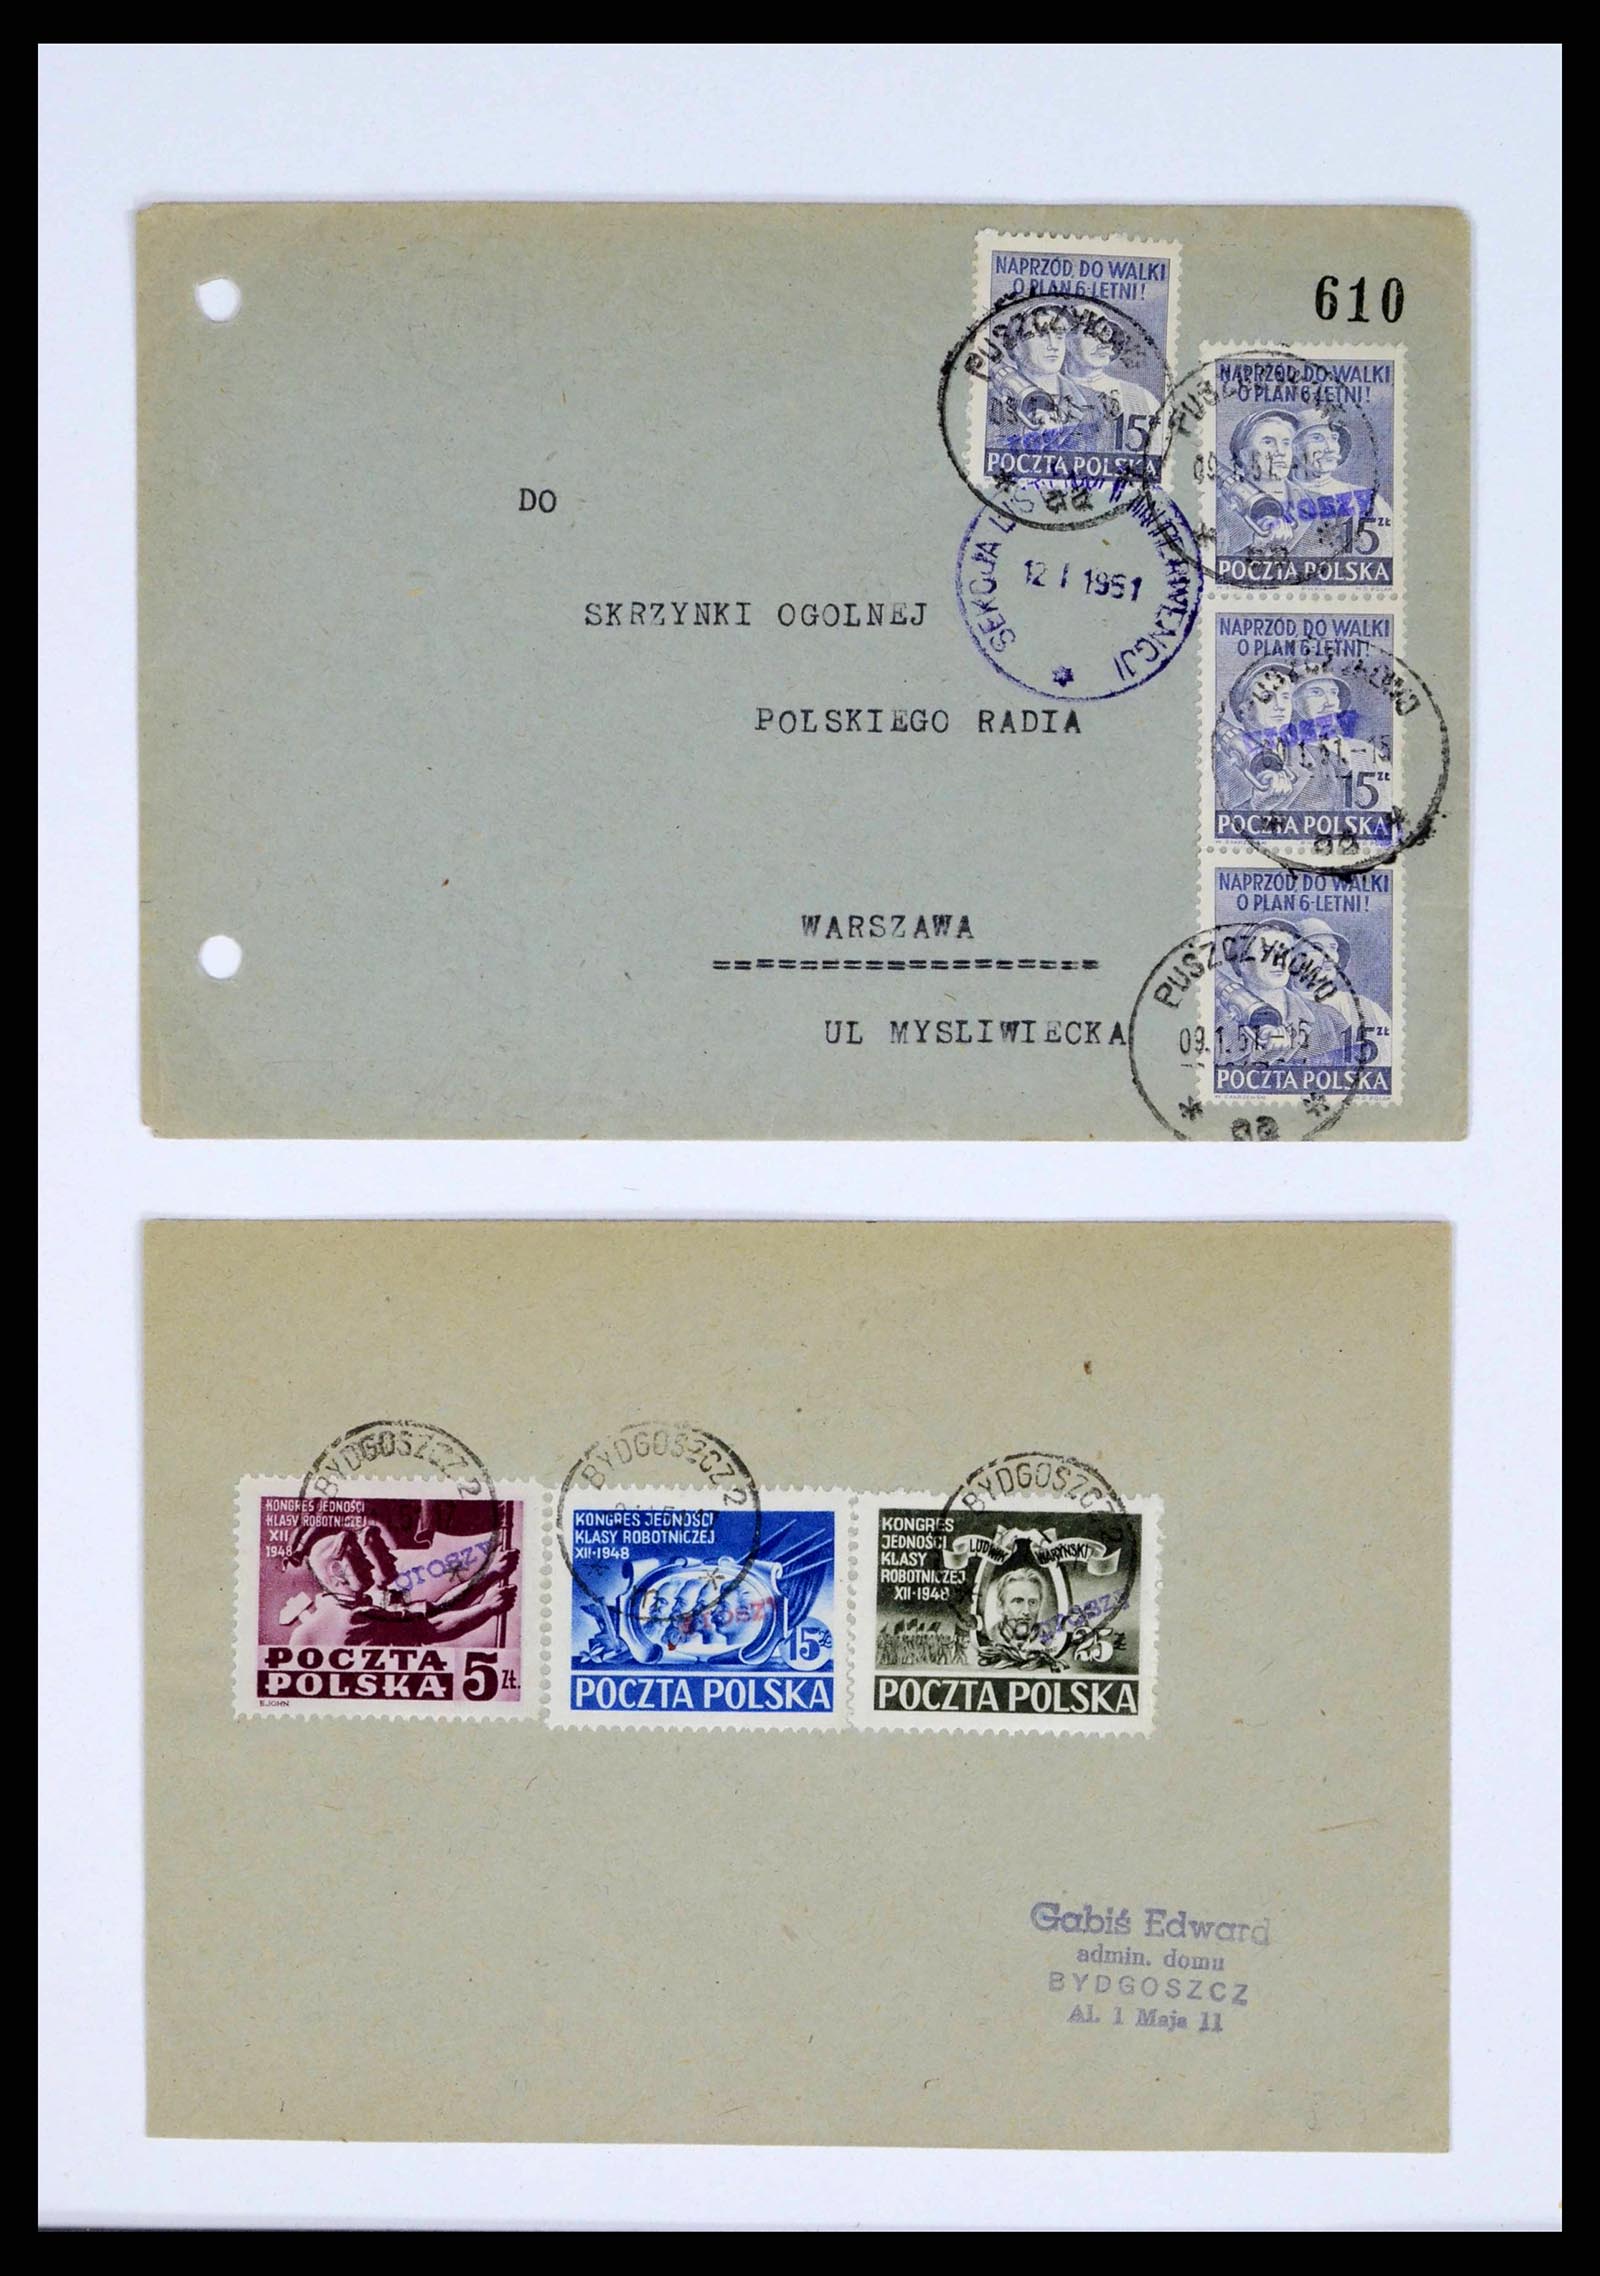 38201 0027 - Stamp collection 38201 Groszy overprints on cover 1950-1951.